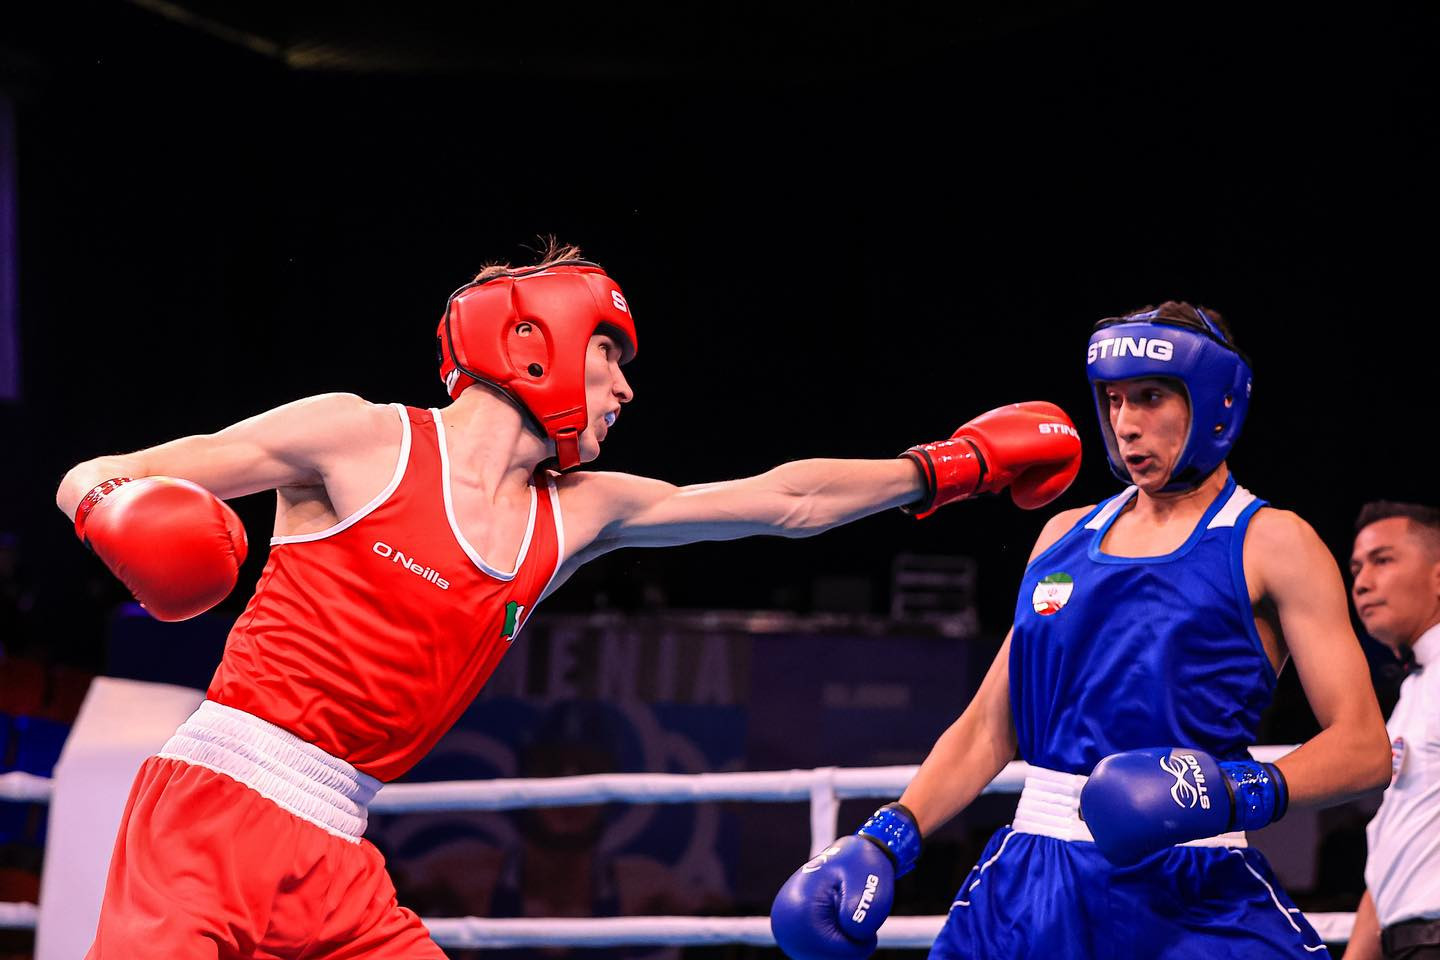 John Maher from the Republic of Ireland (in the red) in action against Amirmohammad Rostampour from Iran © IBA